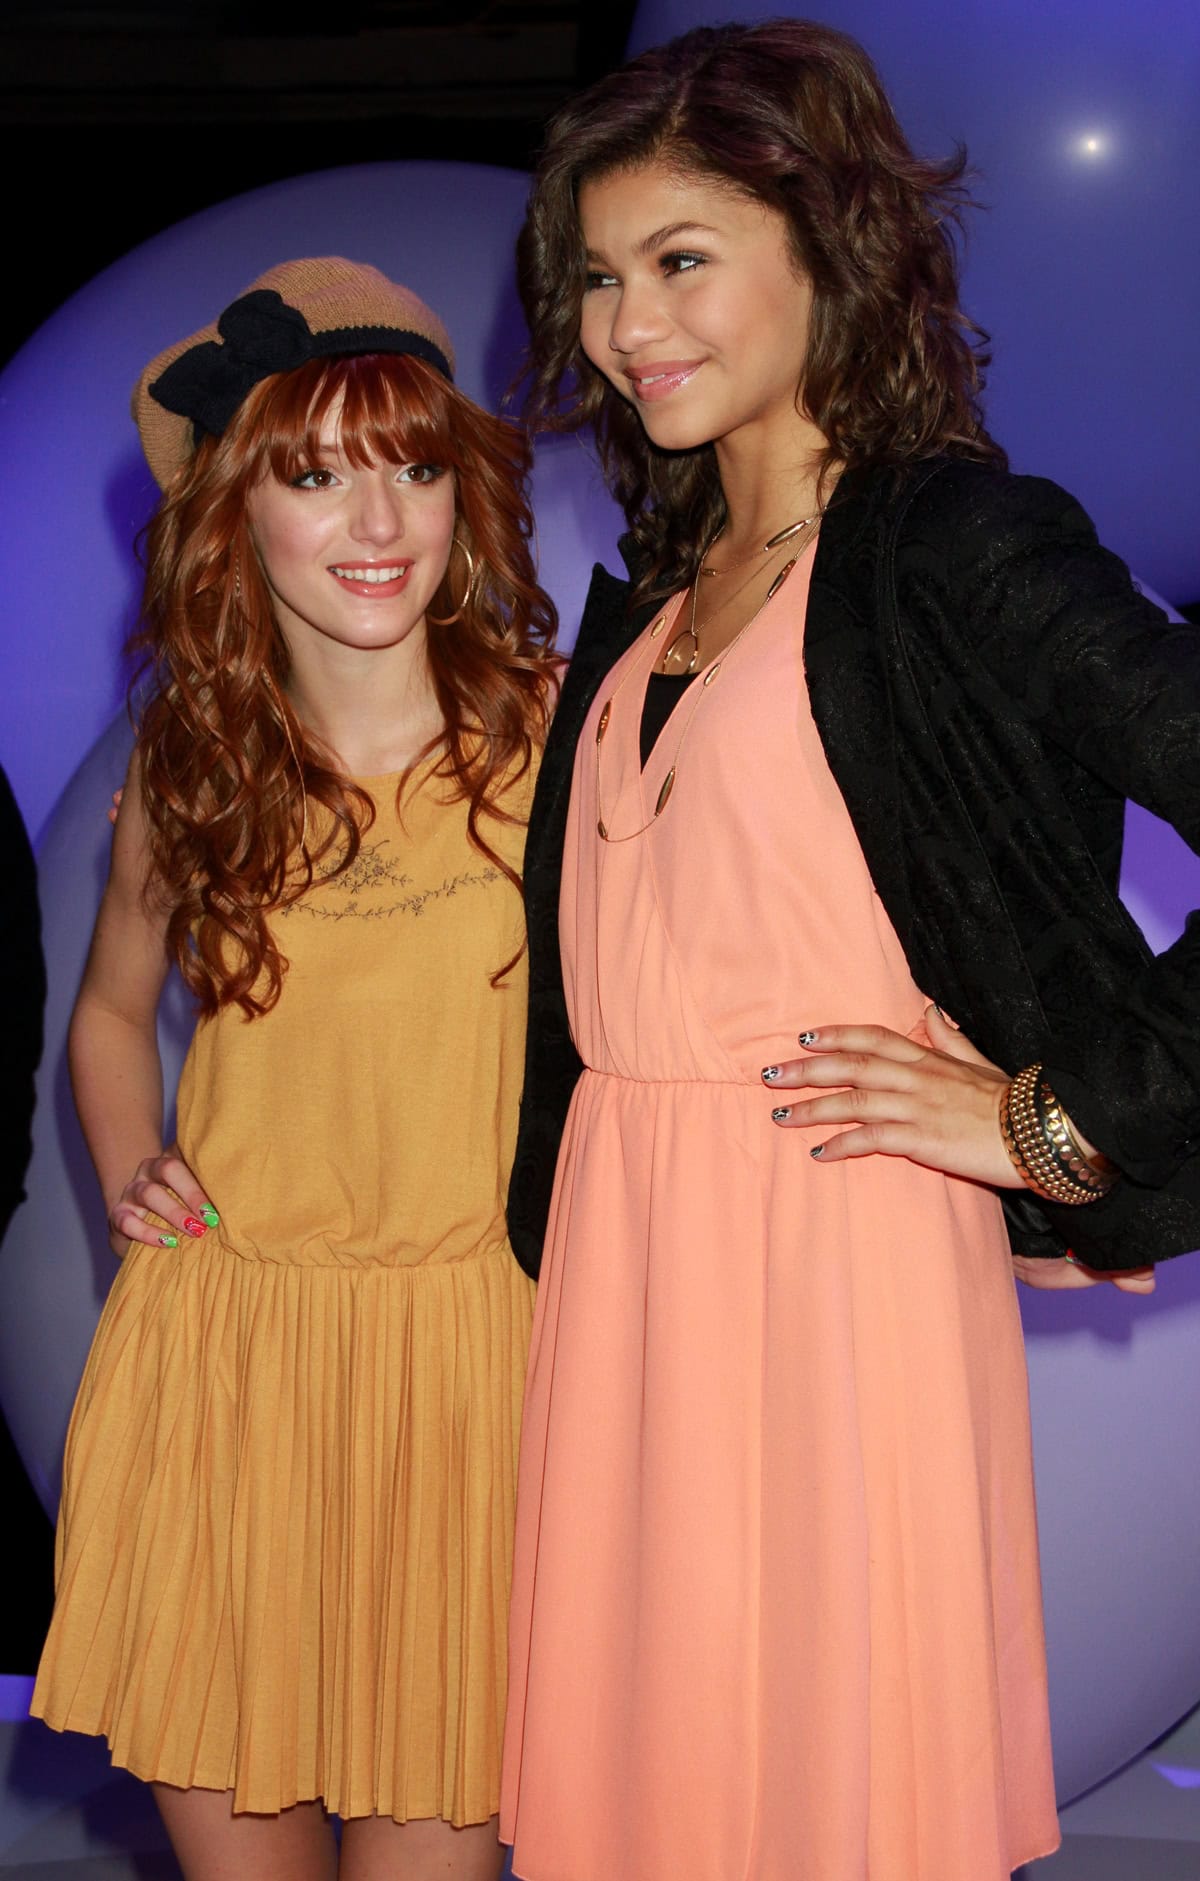 Bella Thorne and Zendaya showcase a charming height contrast with Bella's petite frame complemented by Zendaya's taller stature, both styled in vibrant, youthful dresses